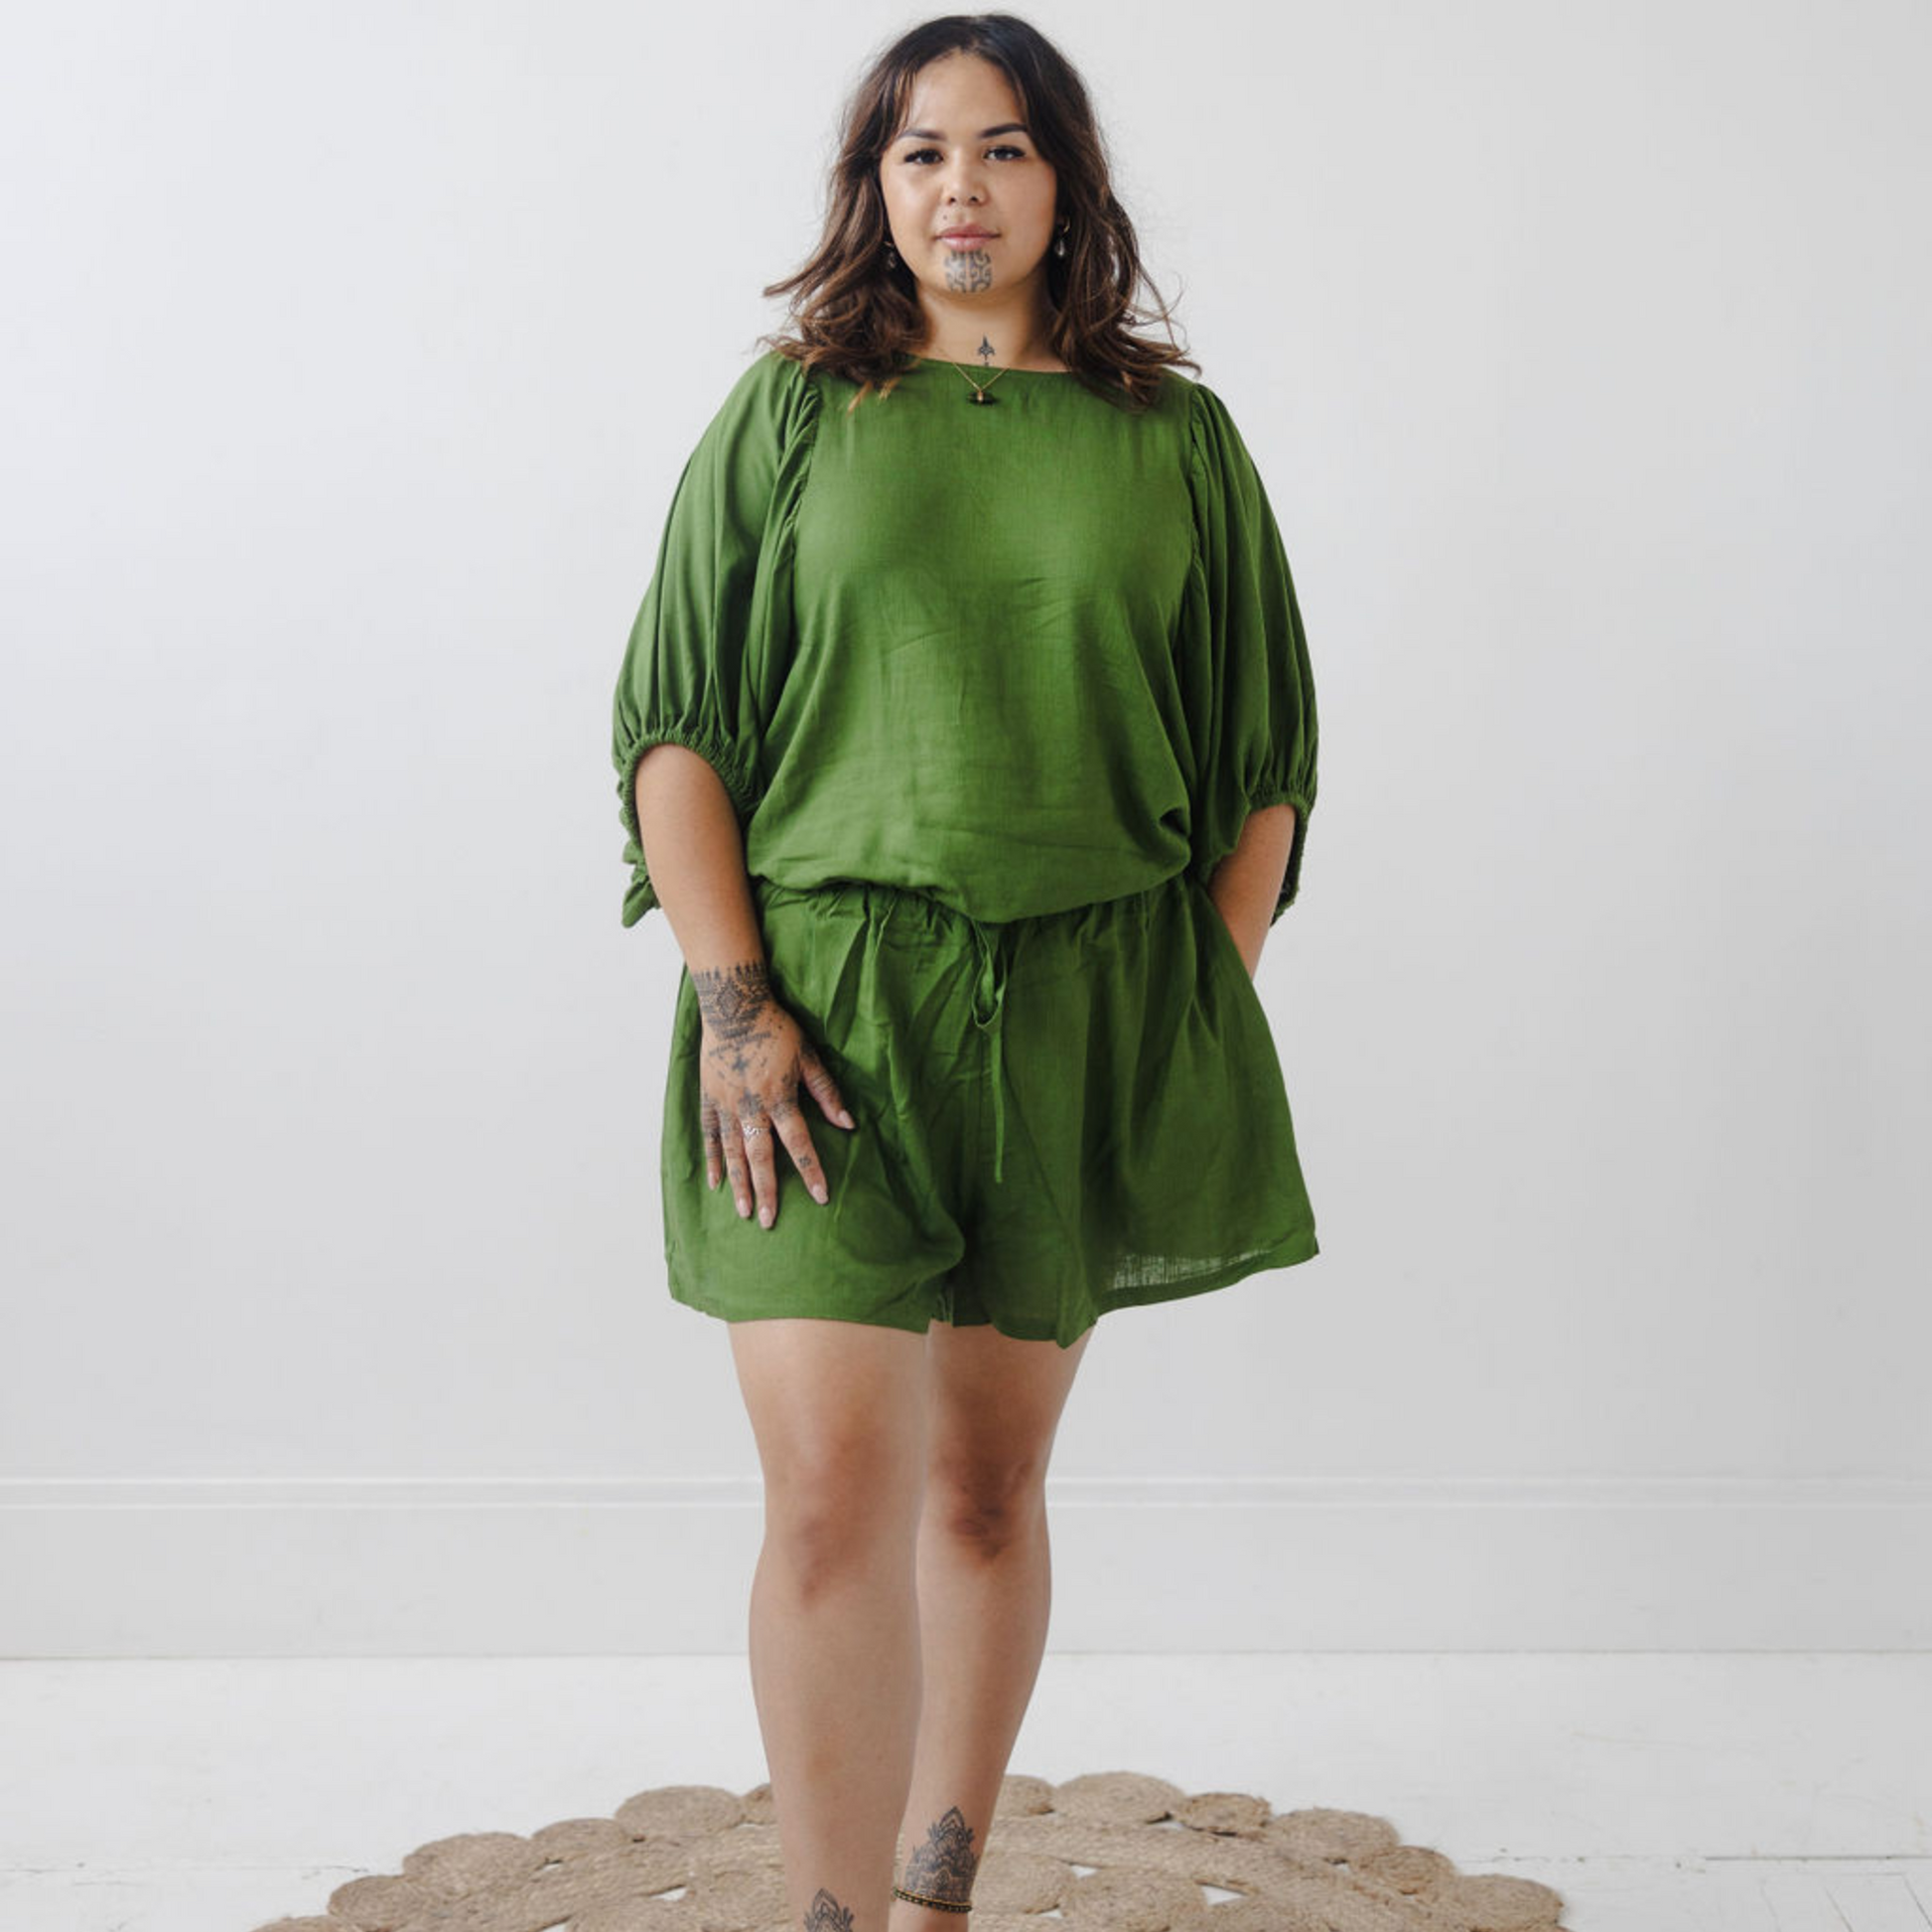 Jonique Oli, founder of Waiapu Road, wearing kapua top and shorts in olive